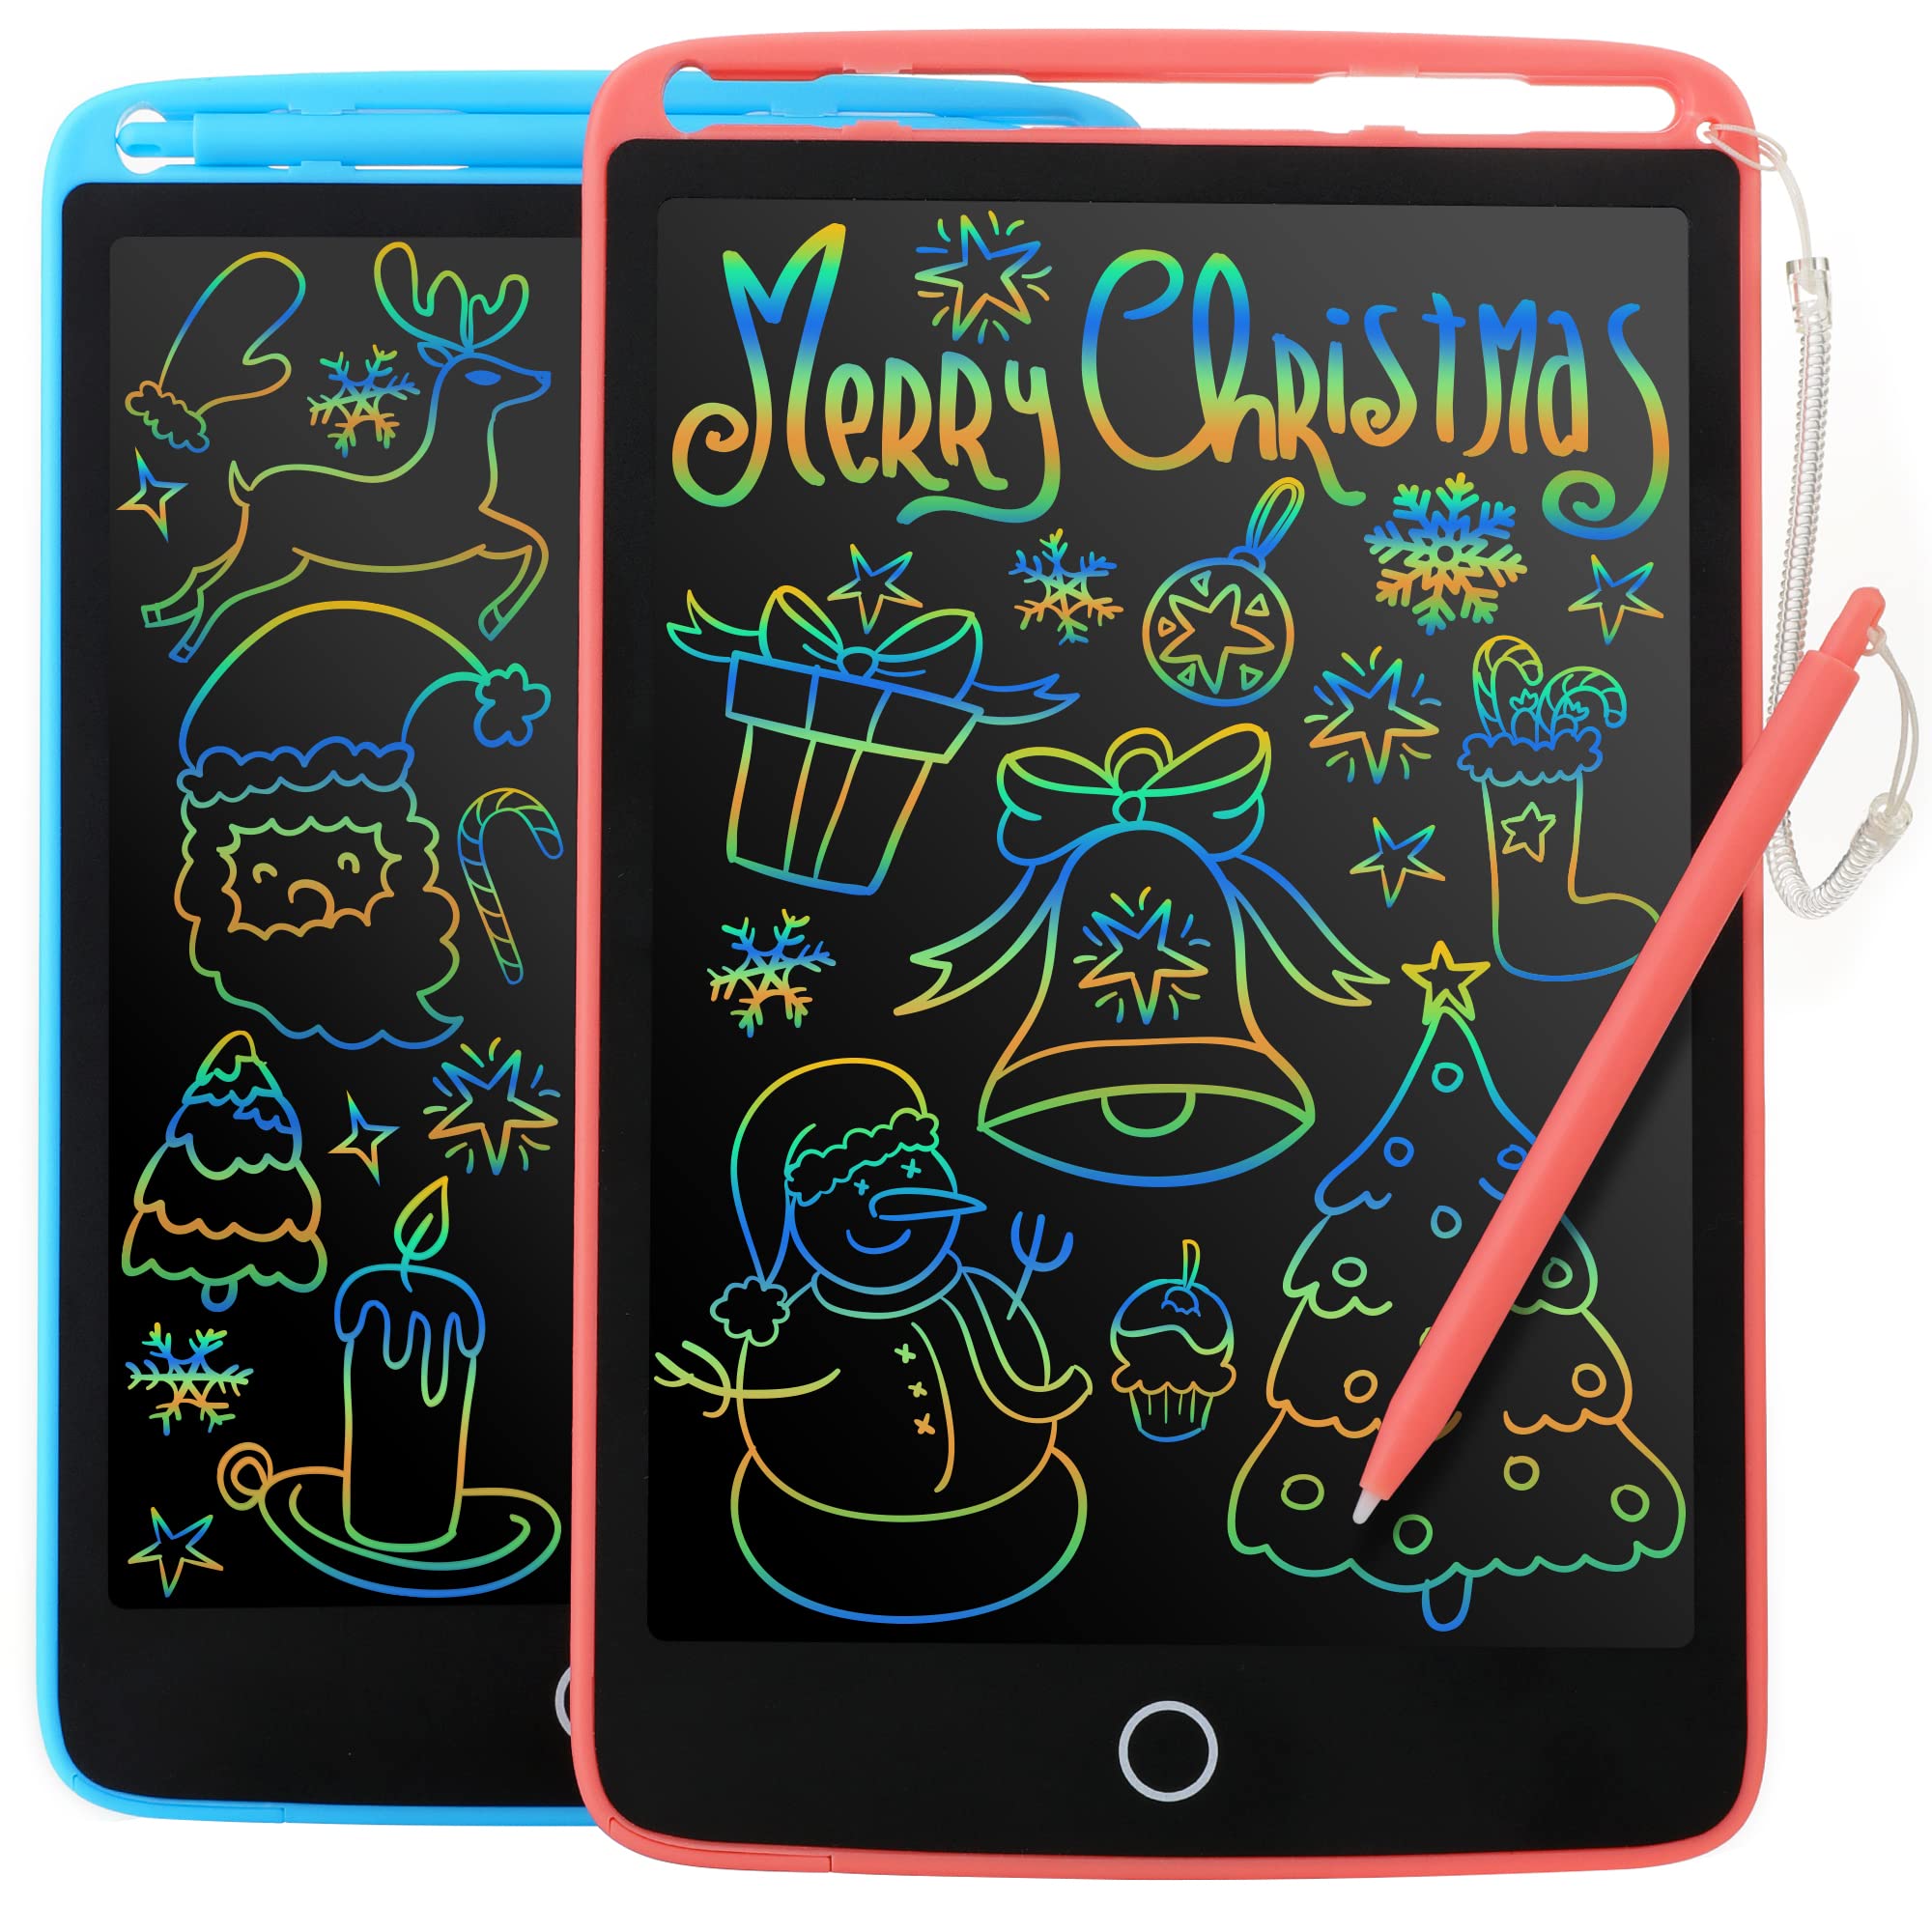 2 Pack LCD Writing Tablet for Kids – 8.5inch Doodle Scribbler Board Colorful Screen Drawing Pad Learning Educational Toy for 3+ Year Old Girls Boys… – JAKATV , SKU-B09FXN3LKB – go.isclix.com/deep_link/5490542209468627421?url=https://fado.vn 🛒Top1Shop🛒 🇻🇳Top1Vietnam🇻🇳 🛍🛒 🇻🇳🇻🇳🇻🇳🛍🛒